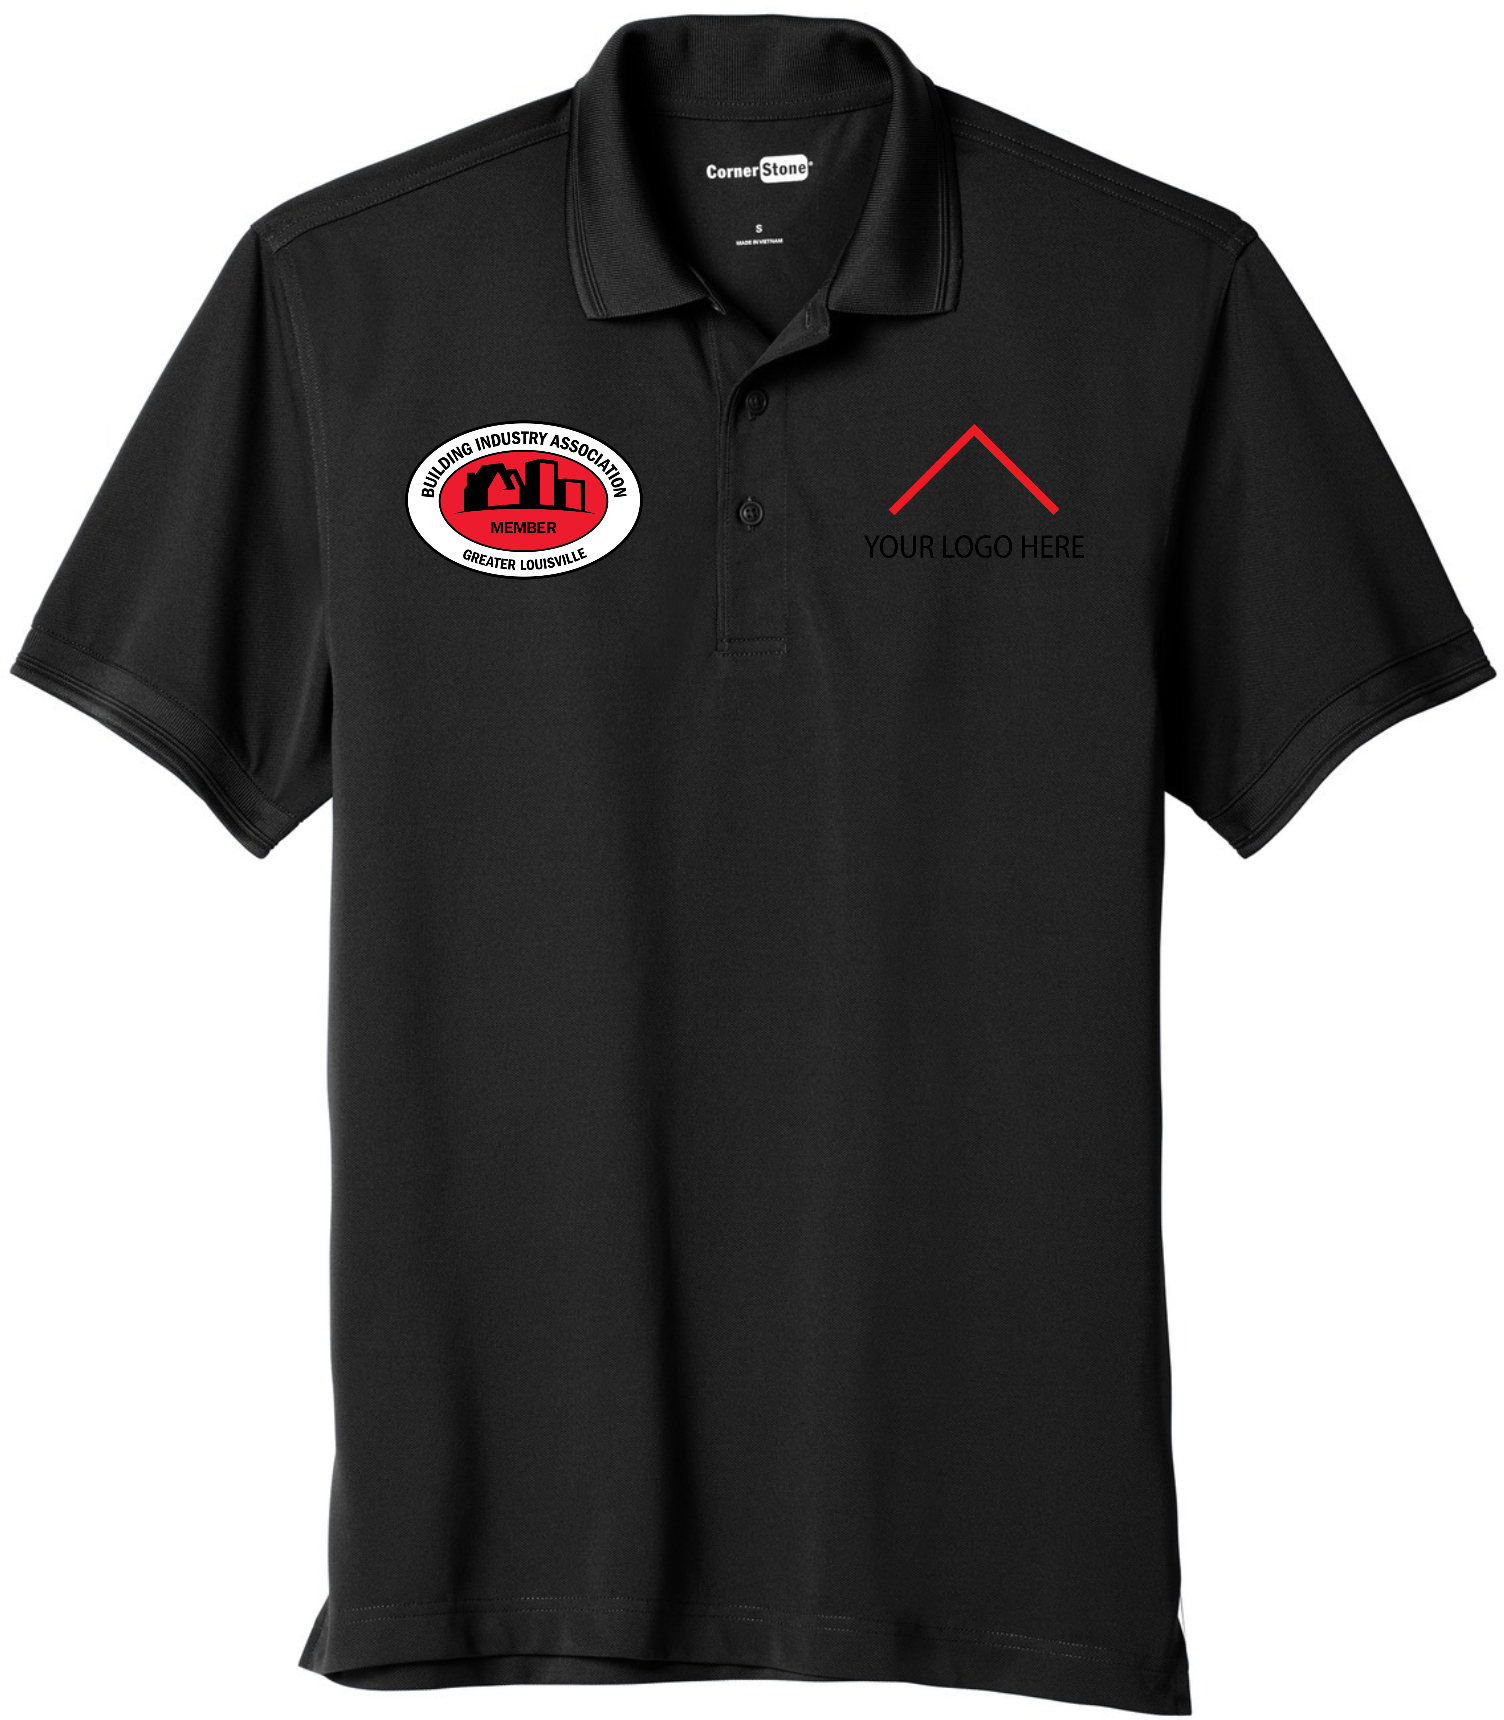 Member - CornerStone ® Industrial Snag-Proof Pique Polo - CS4020 (Add Your Own)